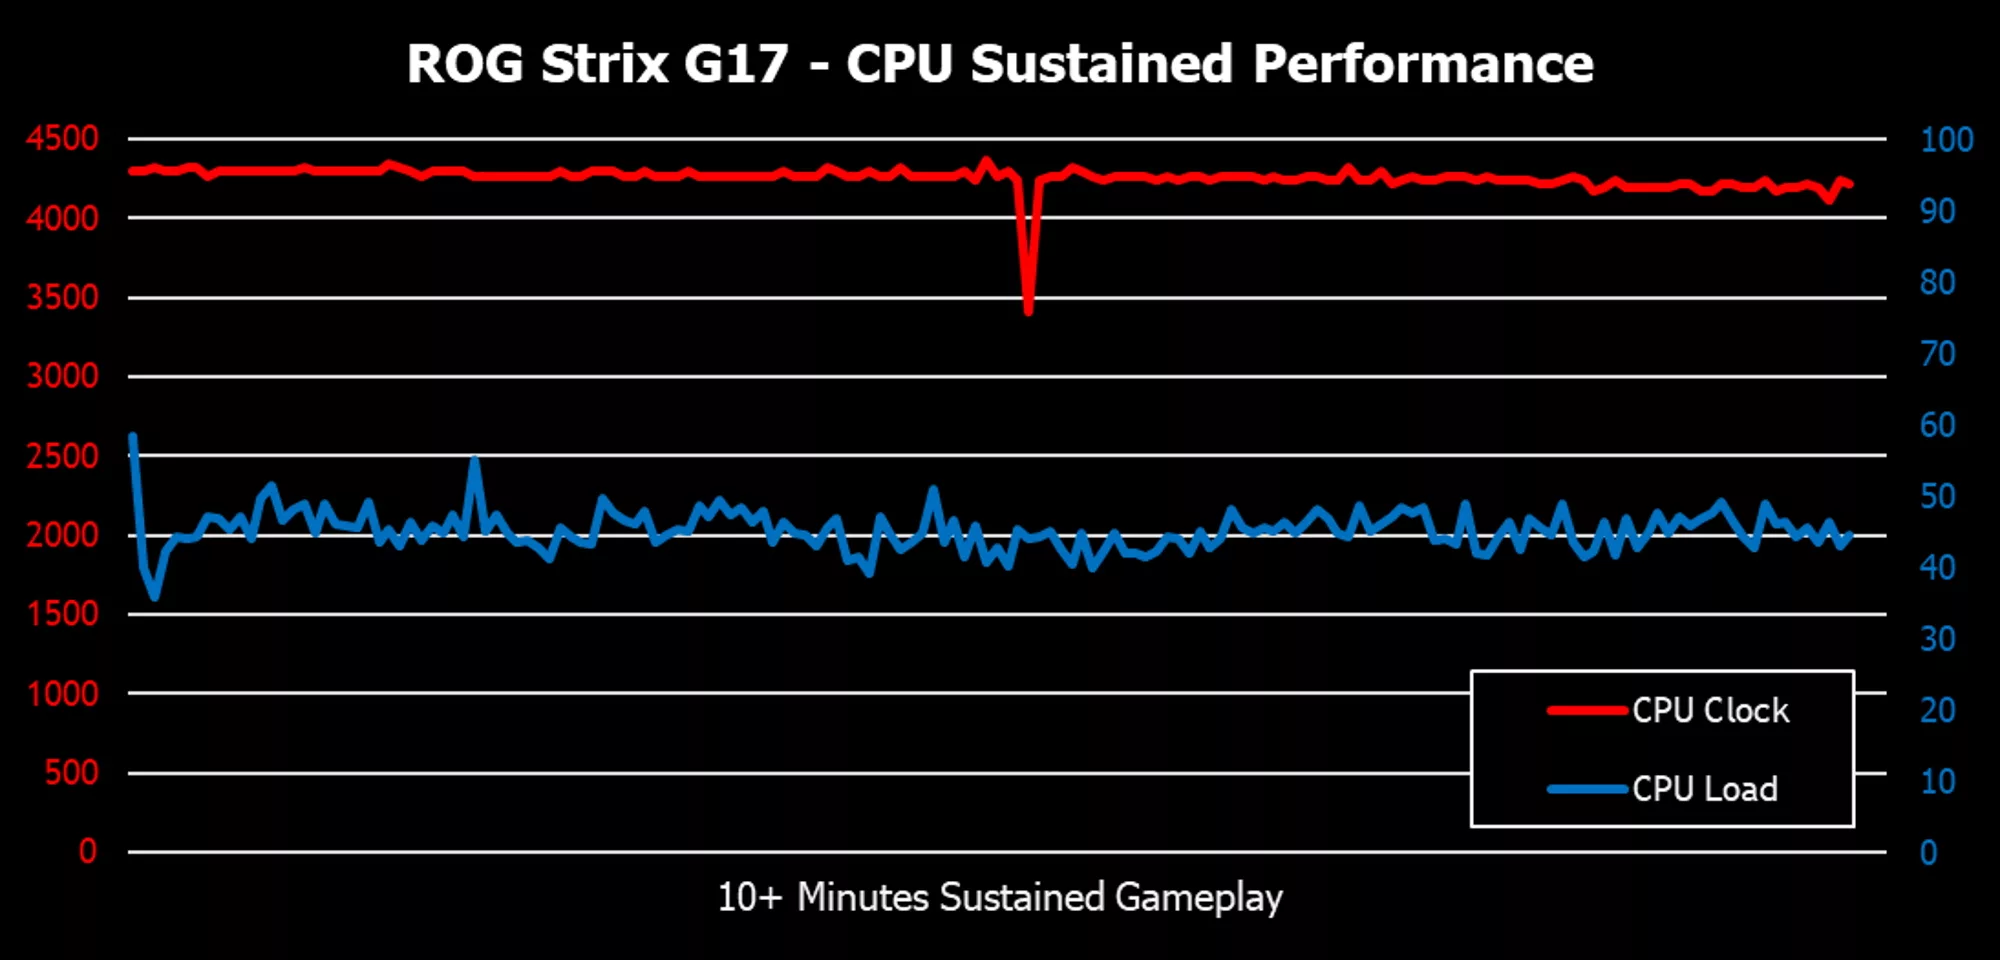 Graph showing sustained CPU performance.